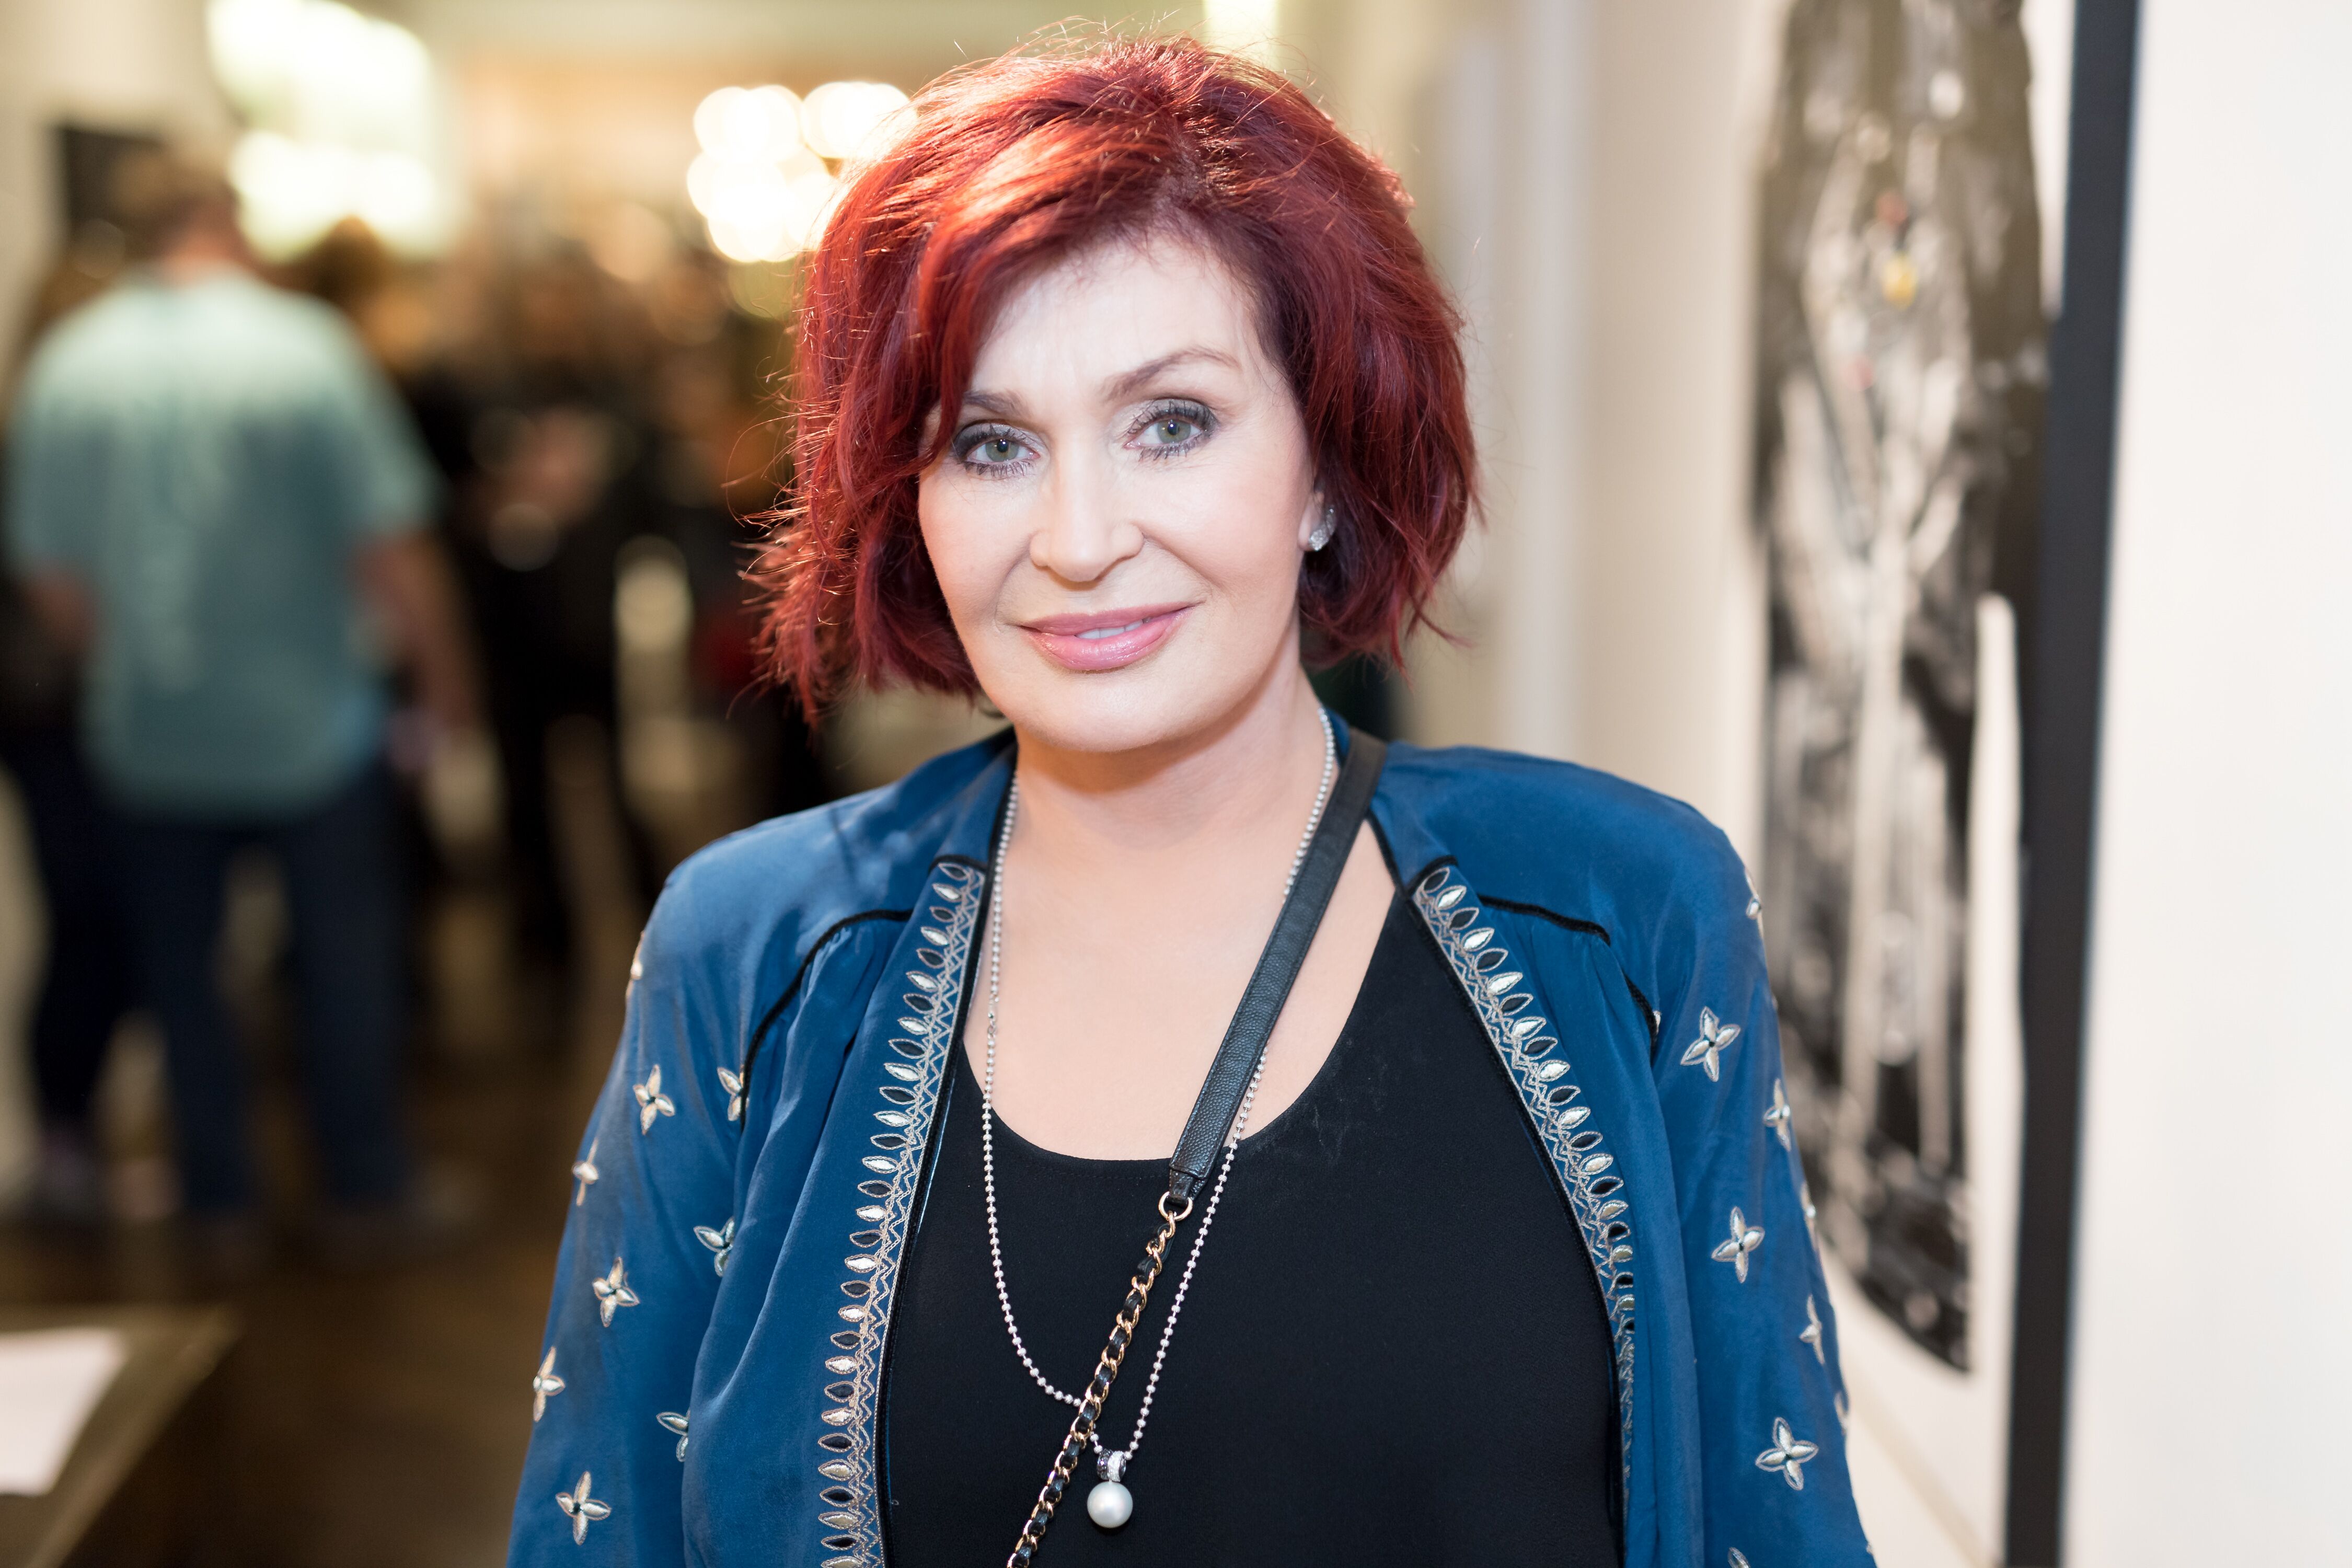 Sharon Osbourne at the Billy Morrison - Aude Somnia Solo Exhibition on September 28, 2017 in Los Angeles, California. | Photo: Getty Images